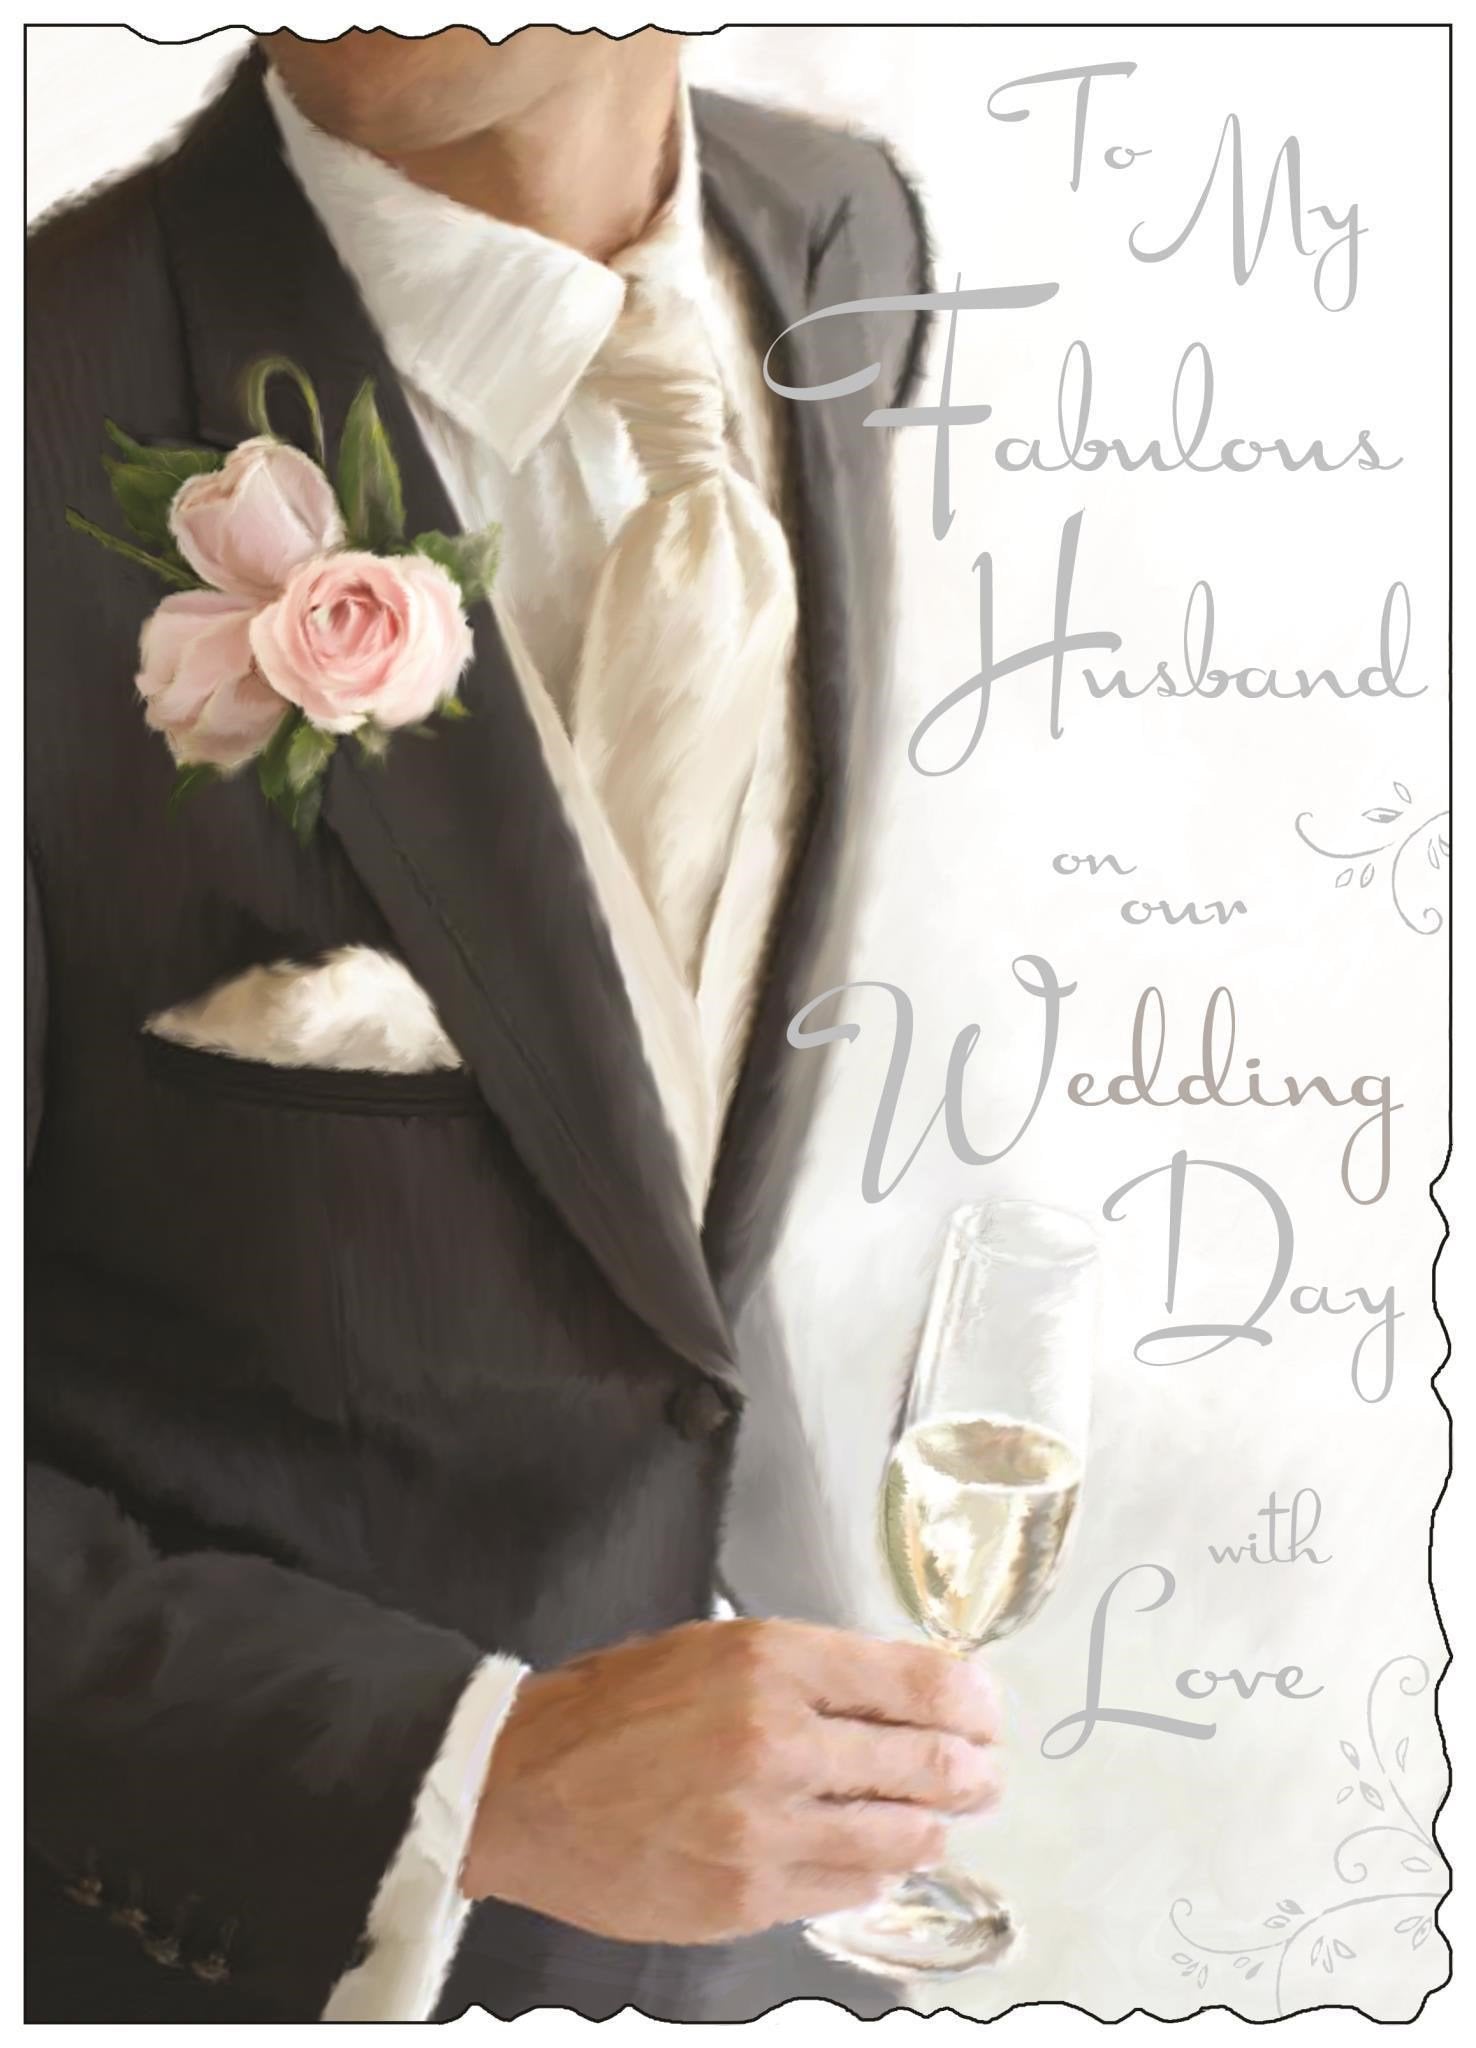 Front of Wedding Day Husband  Greetings Card